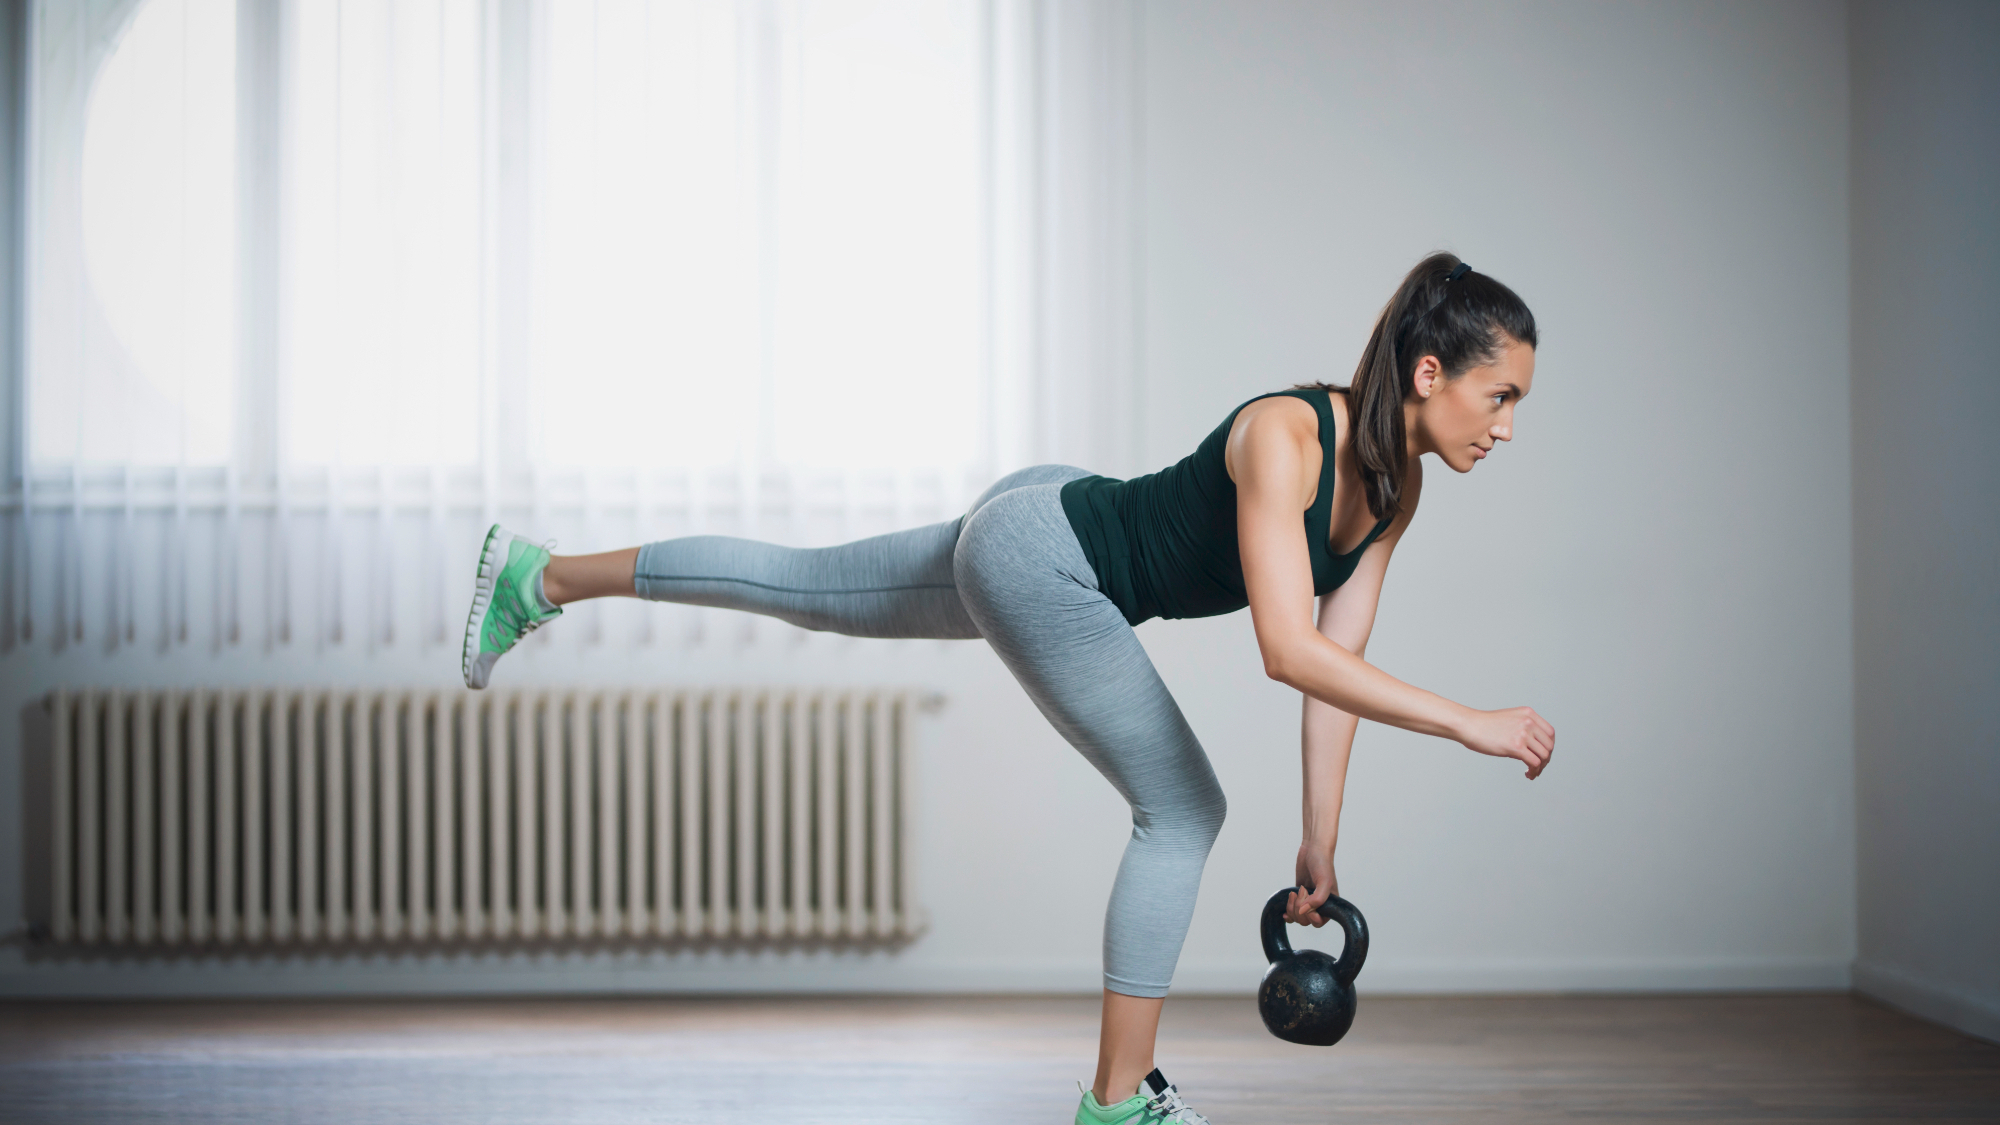 Want to build core strength? the crunches and do this kettlebell deadlift workout | Fit&Well